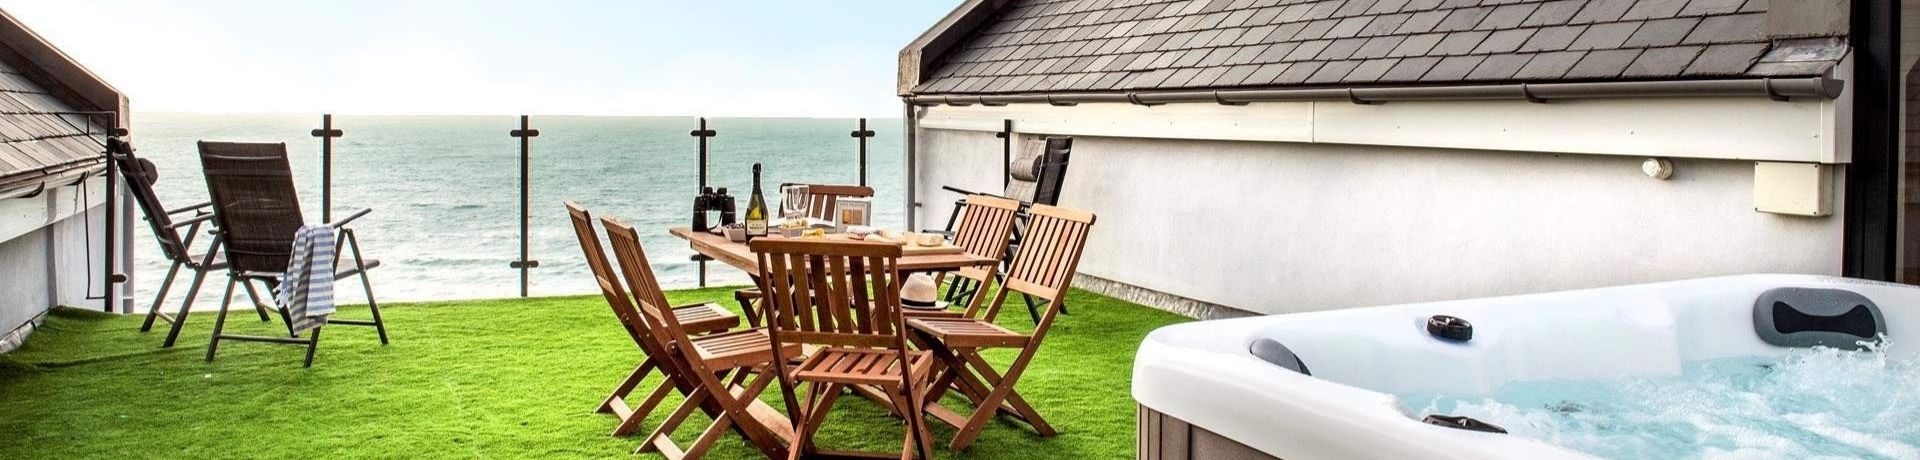 From sea to soak: the best coastal cottages with hot tubs in Cornwall